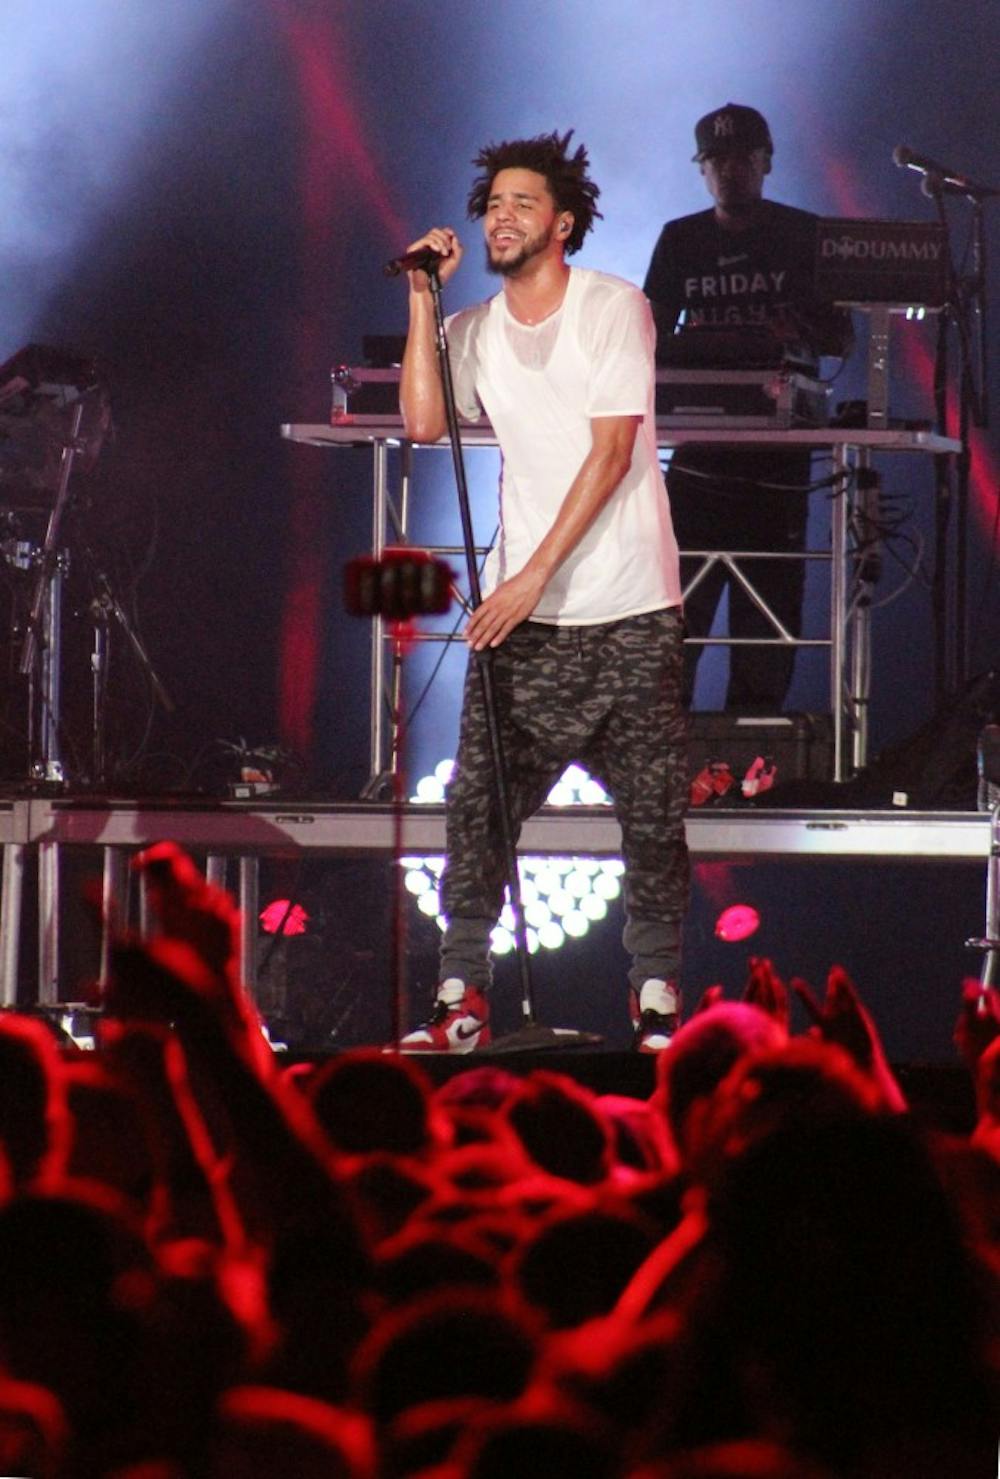 J. Cole performed at the Made in America festival on Sunday night.